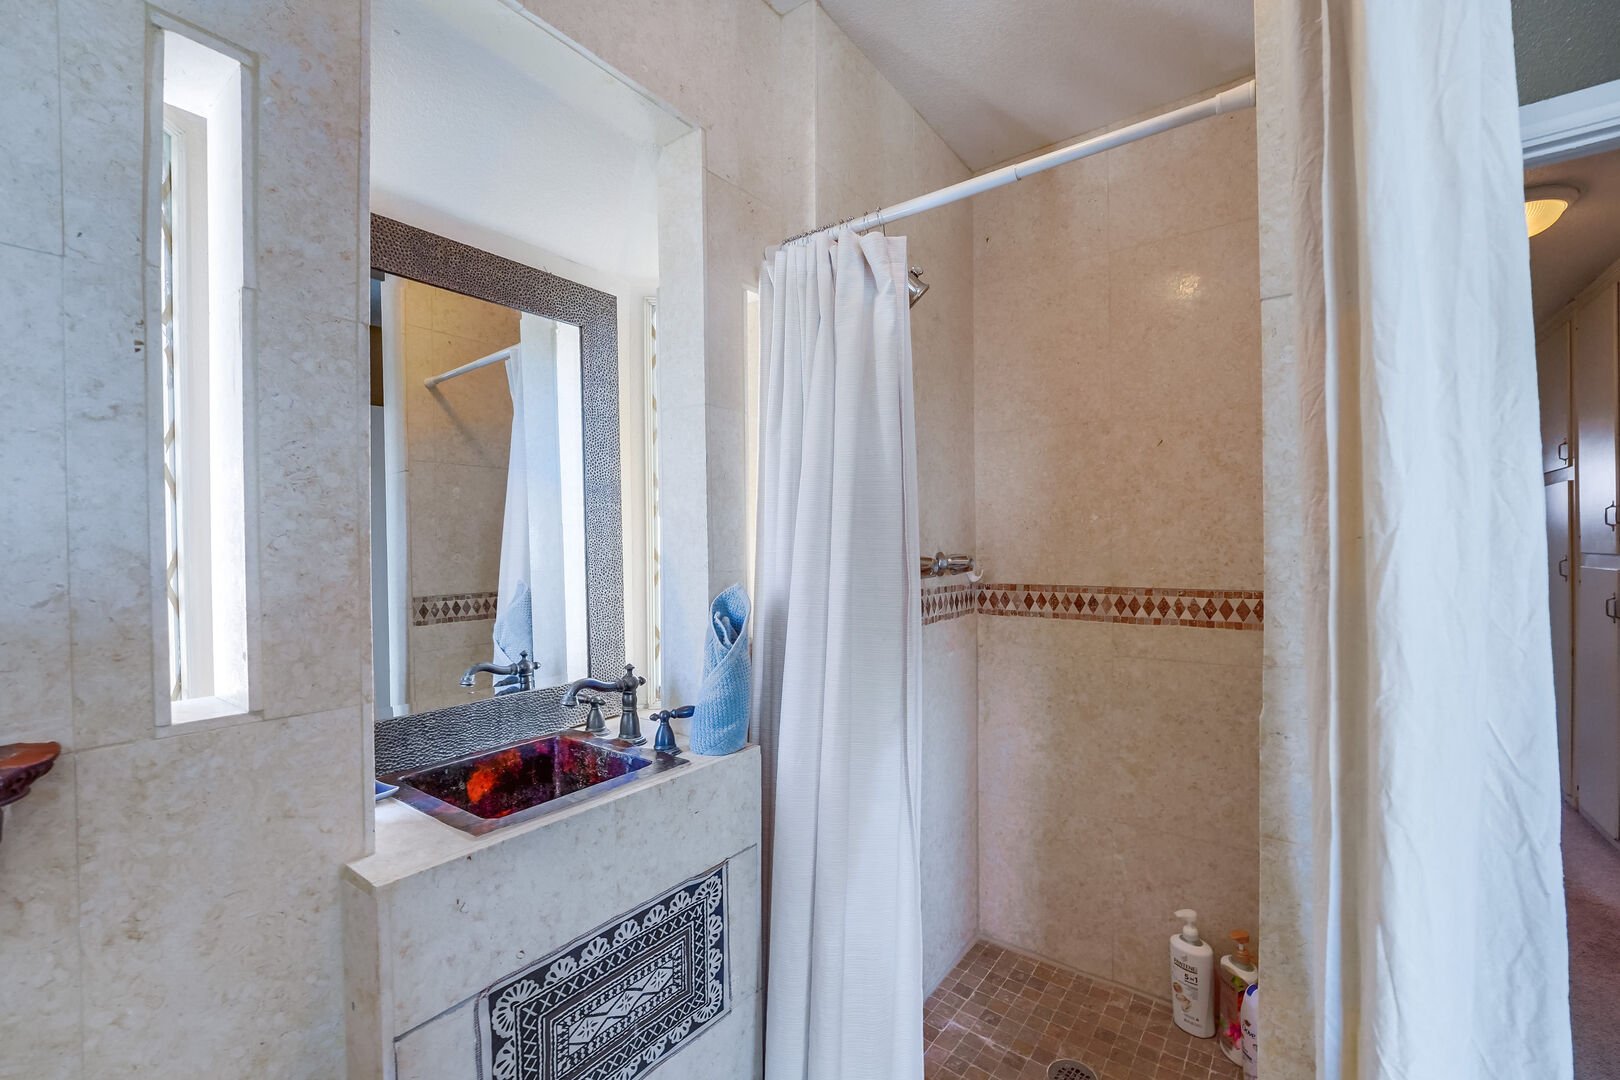 Master bedroom separate walk-in shower and vanity. Please note: the bathroom amenities are not private, there is no dividing door. The bathroom is within the bedroom but there is a curtain divider